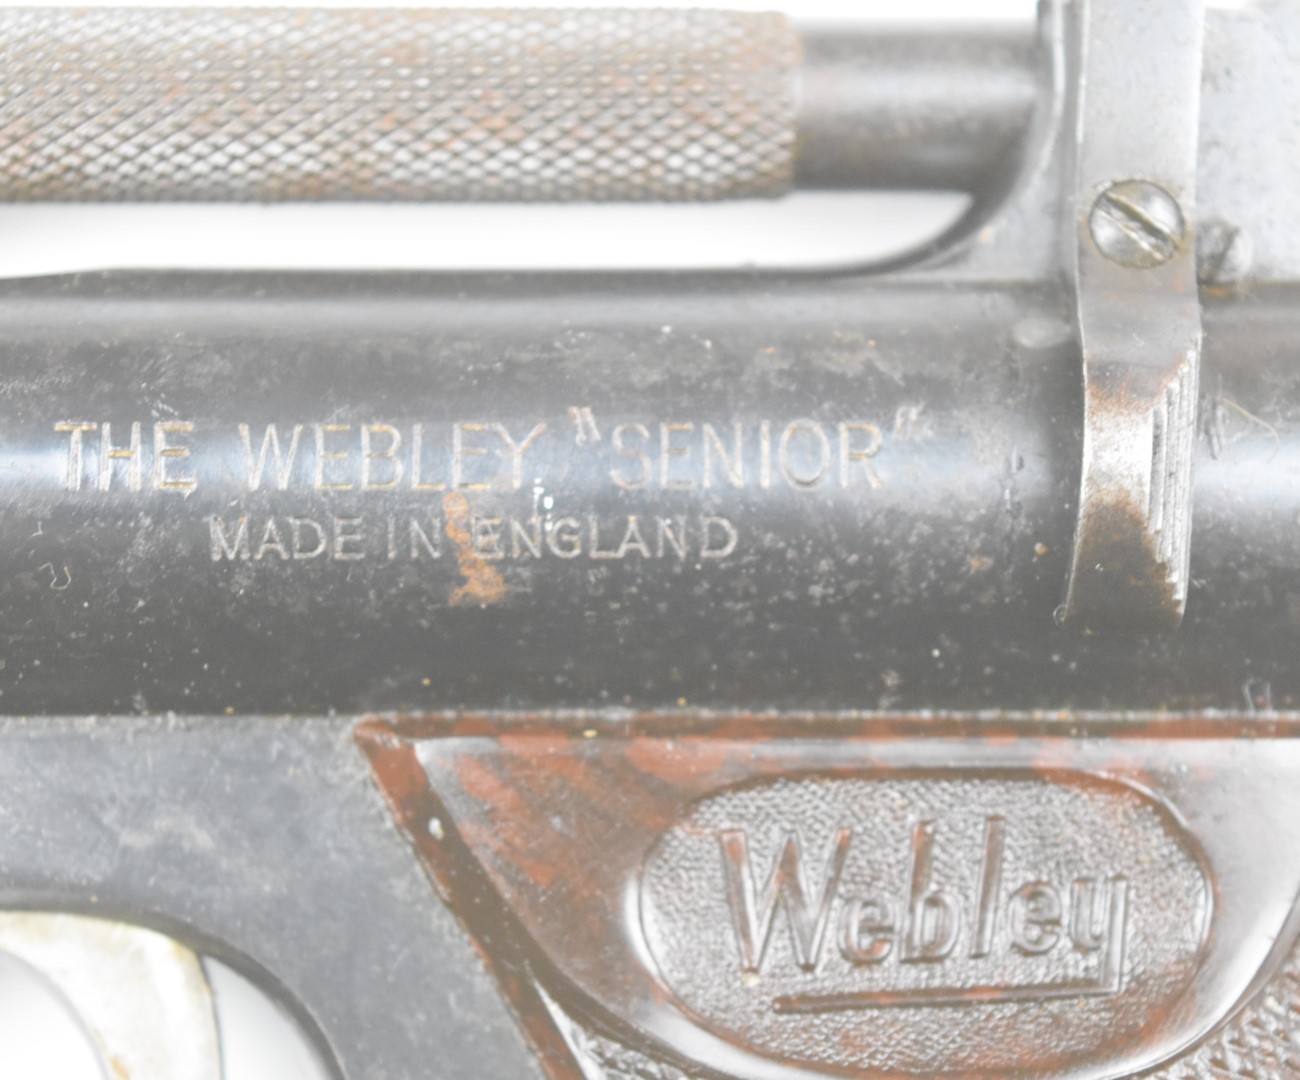 Webley Senior .177 air pistol with named and chequered Bakelite grips and adjustable sights, - Image 8 of 11